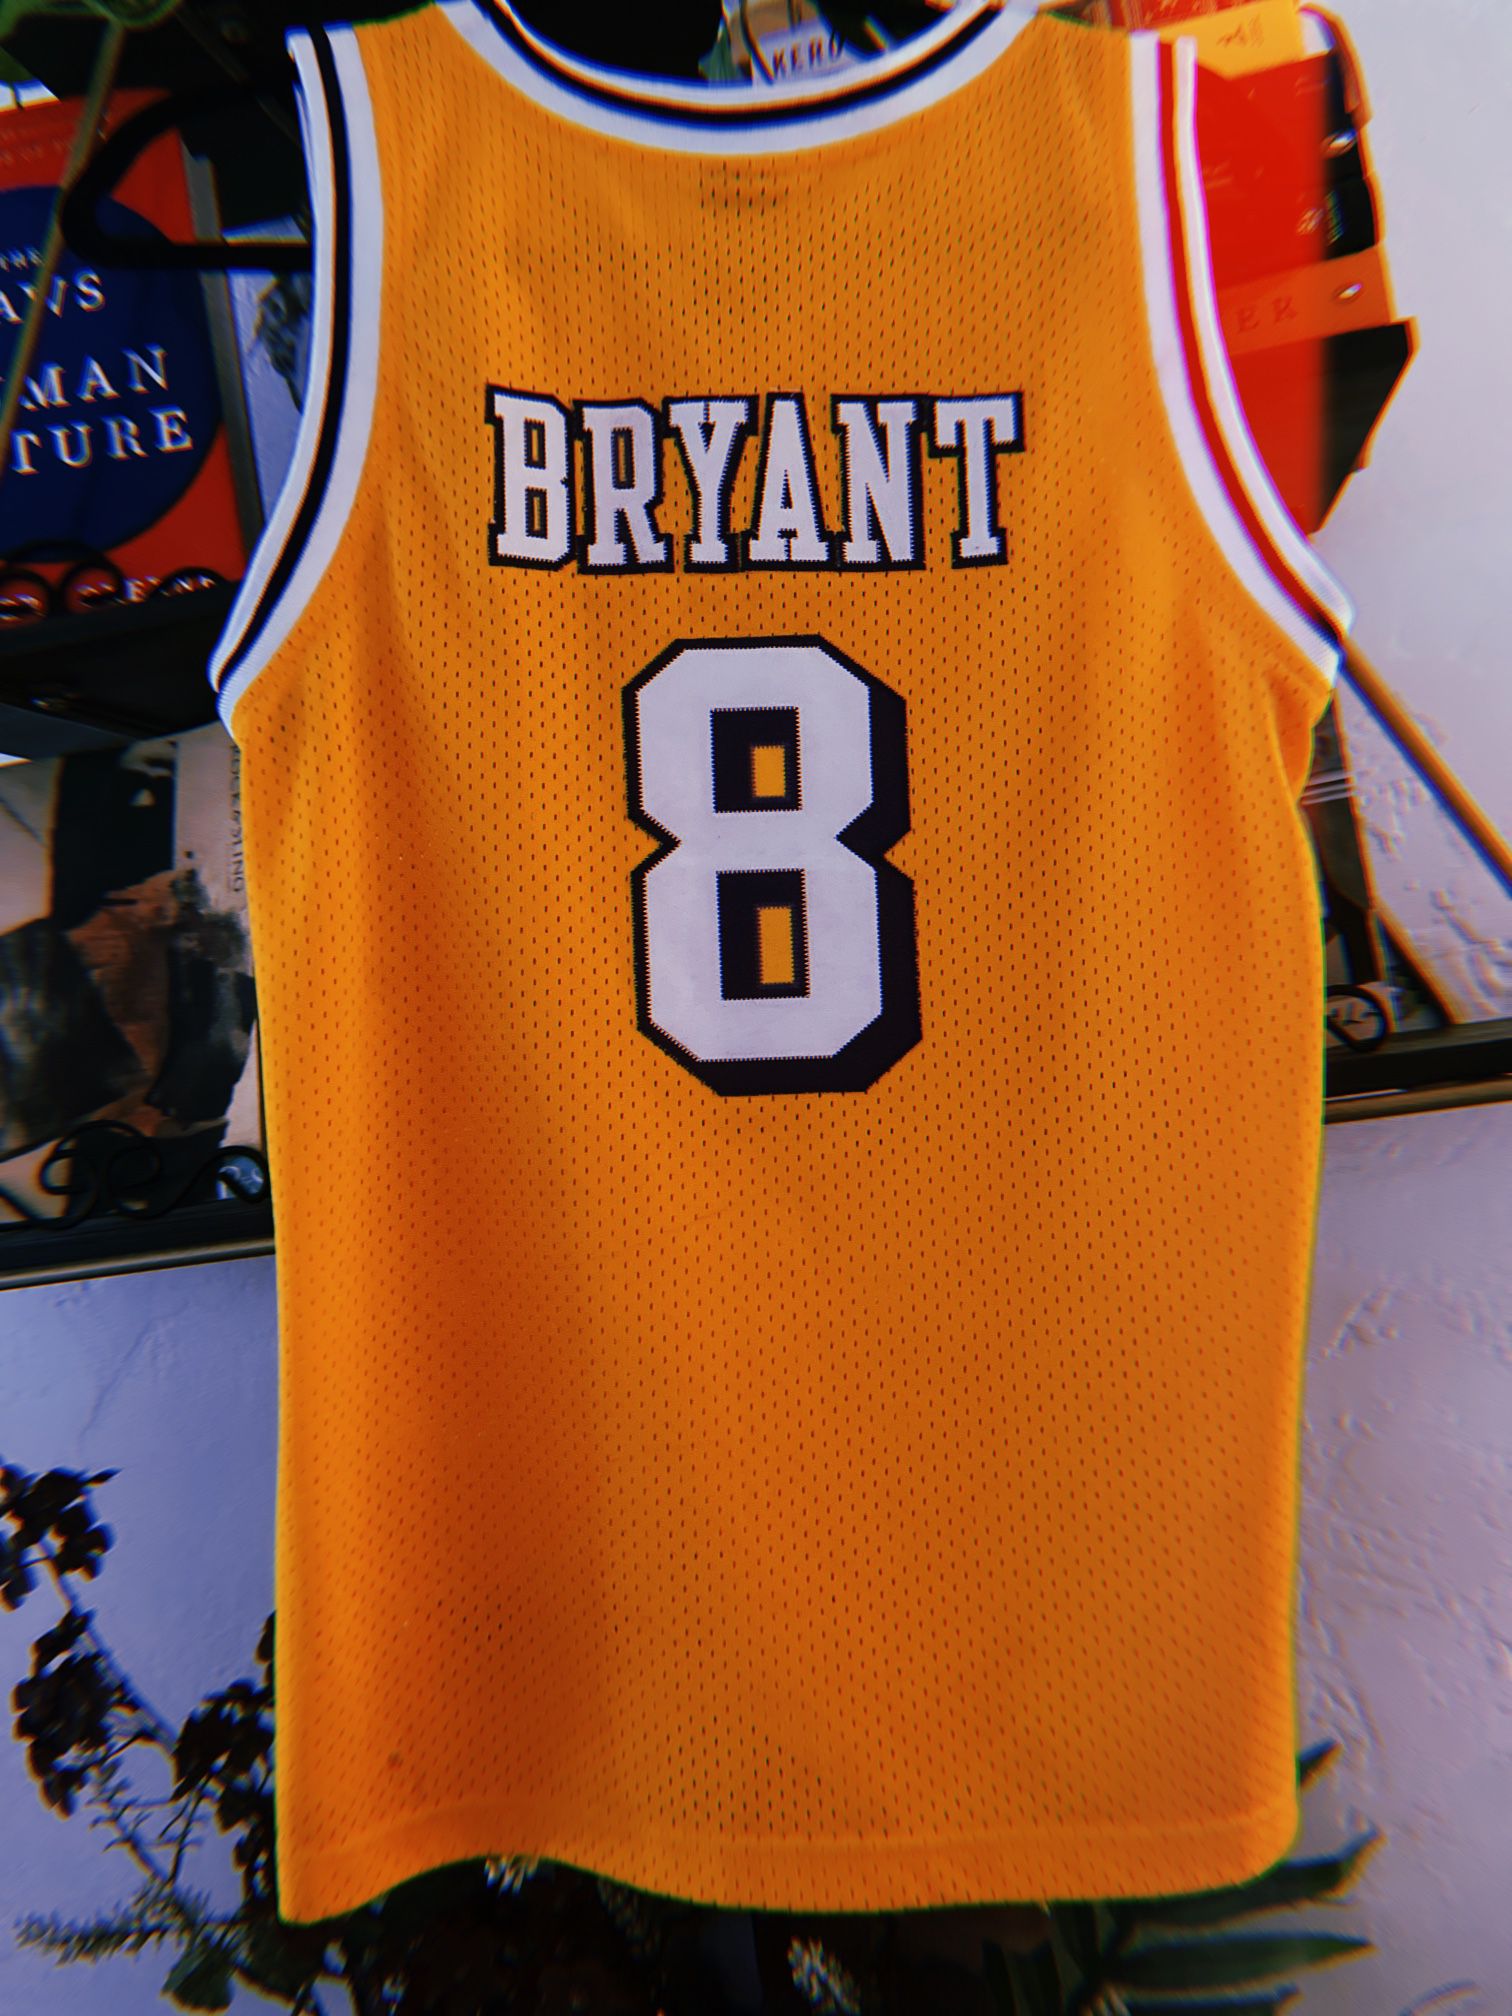 2 Vintage Nike Kobe Bryant Lakers Jersey Size 2xl for Sale in Norwalk, CA -  OfferUp